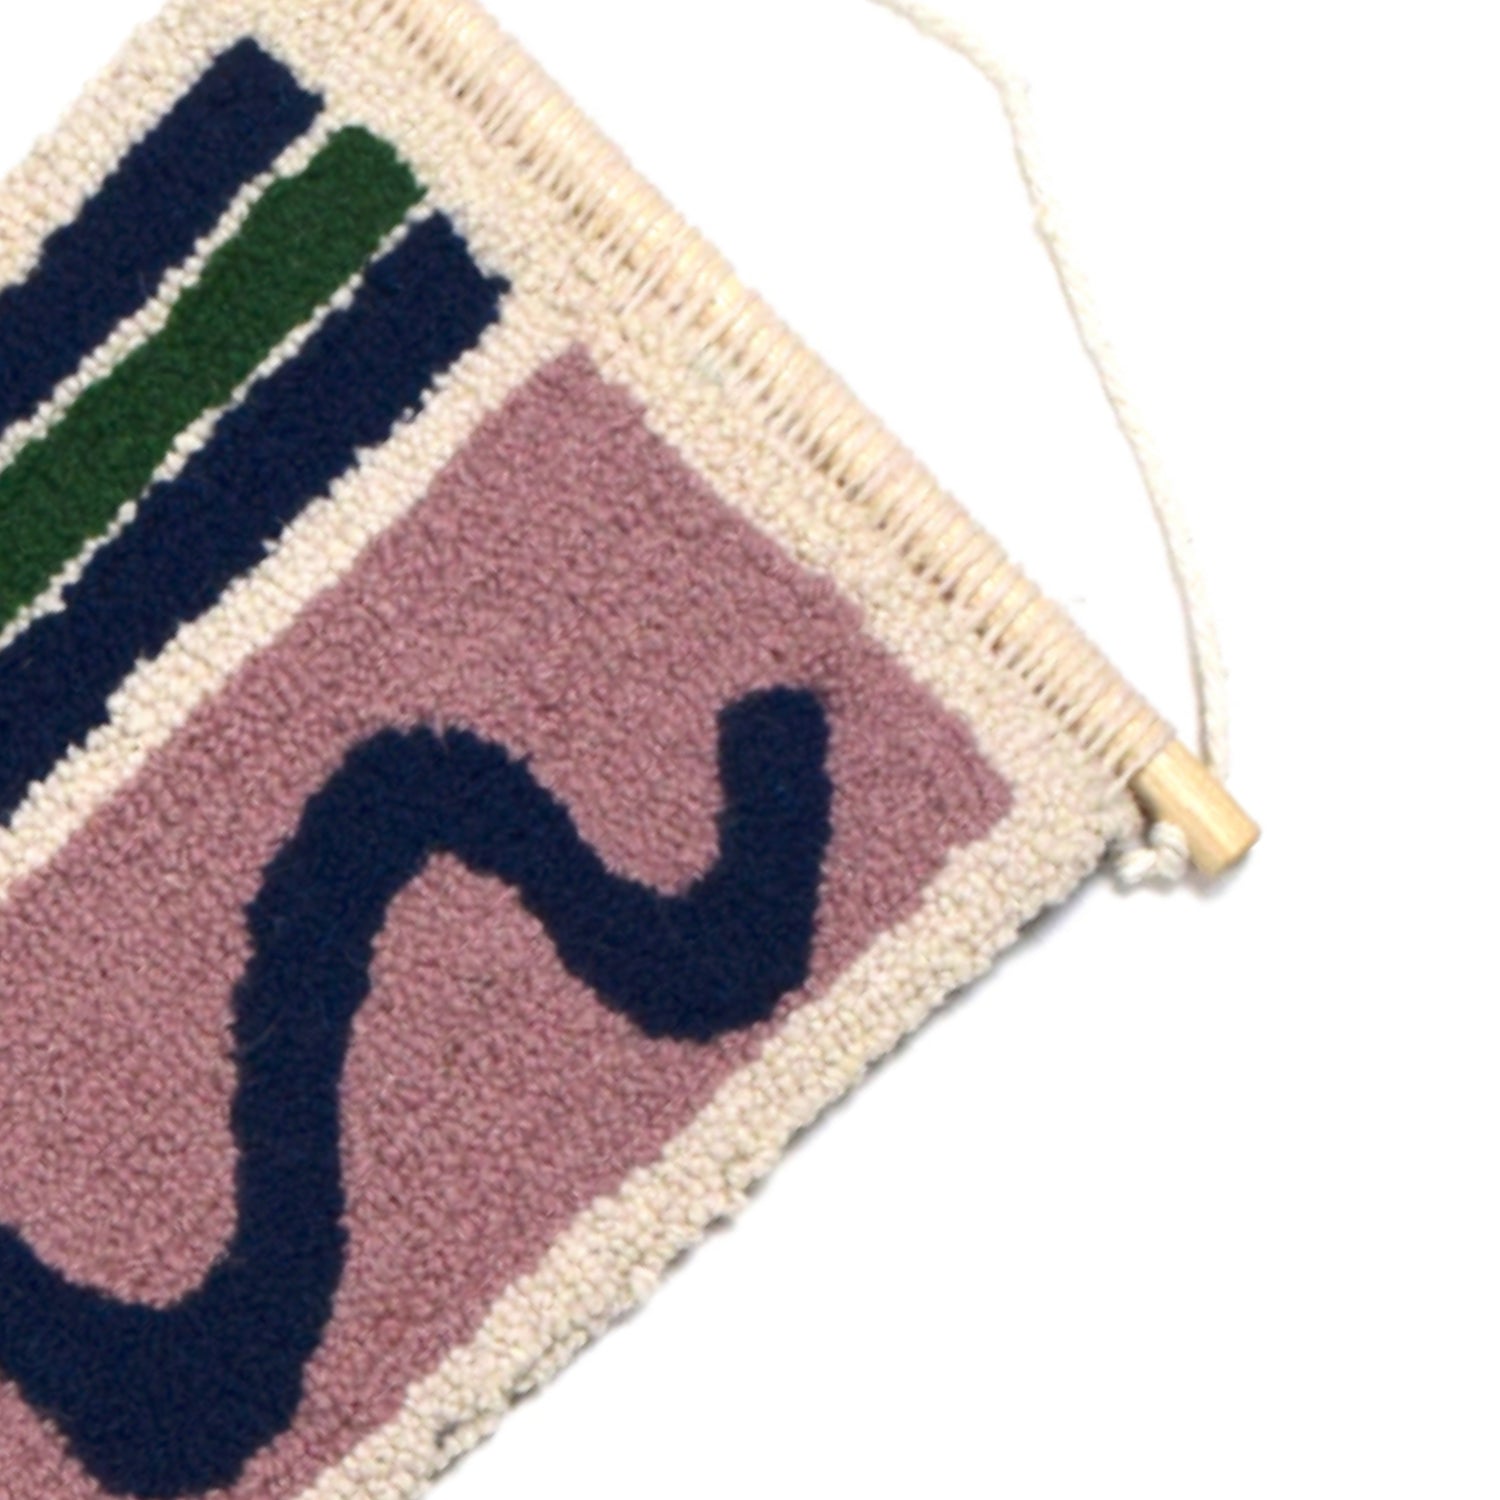 A loop pile tufted wall hanging using doodled shapes, squiggles, rectangles, stripes, triangles and patterns using reclaimed yarns. Lilac, Navy, Cream, Royal Blue and Green close up.